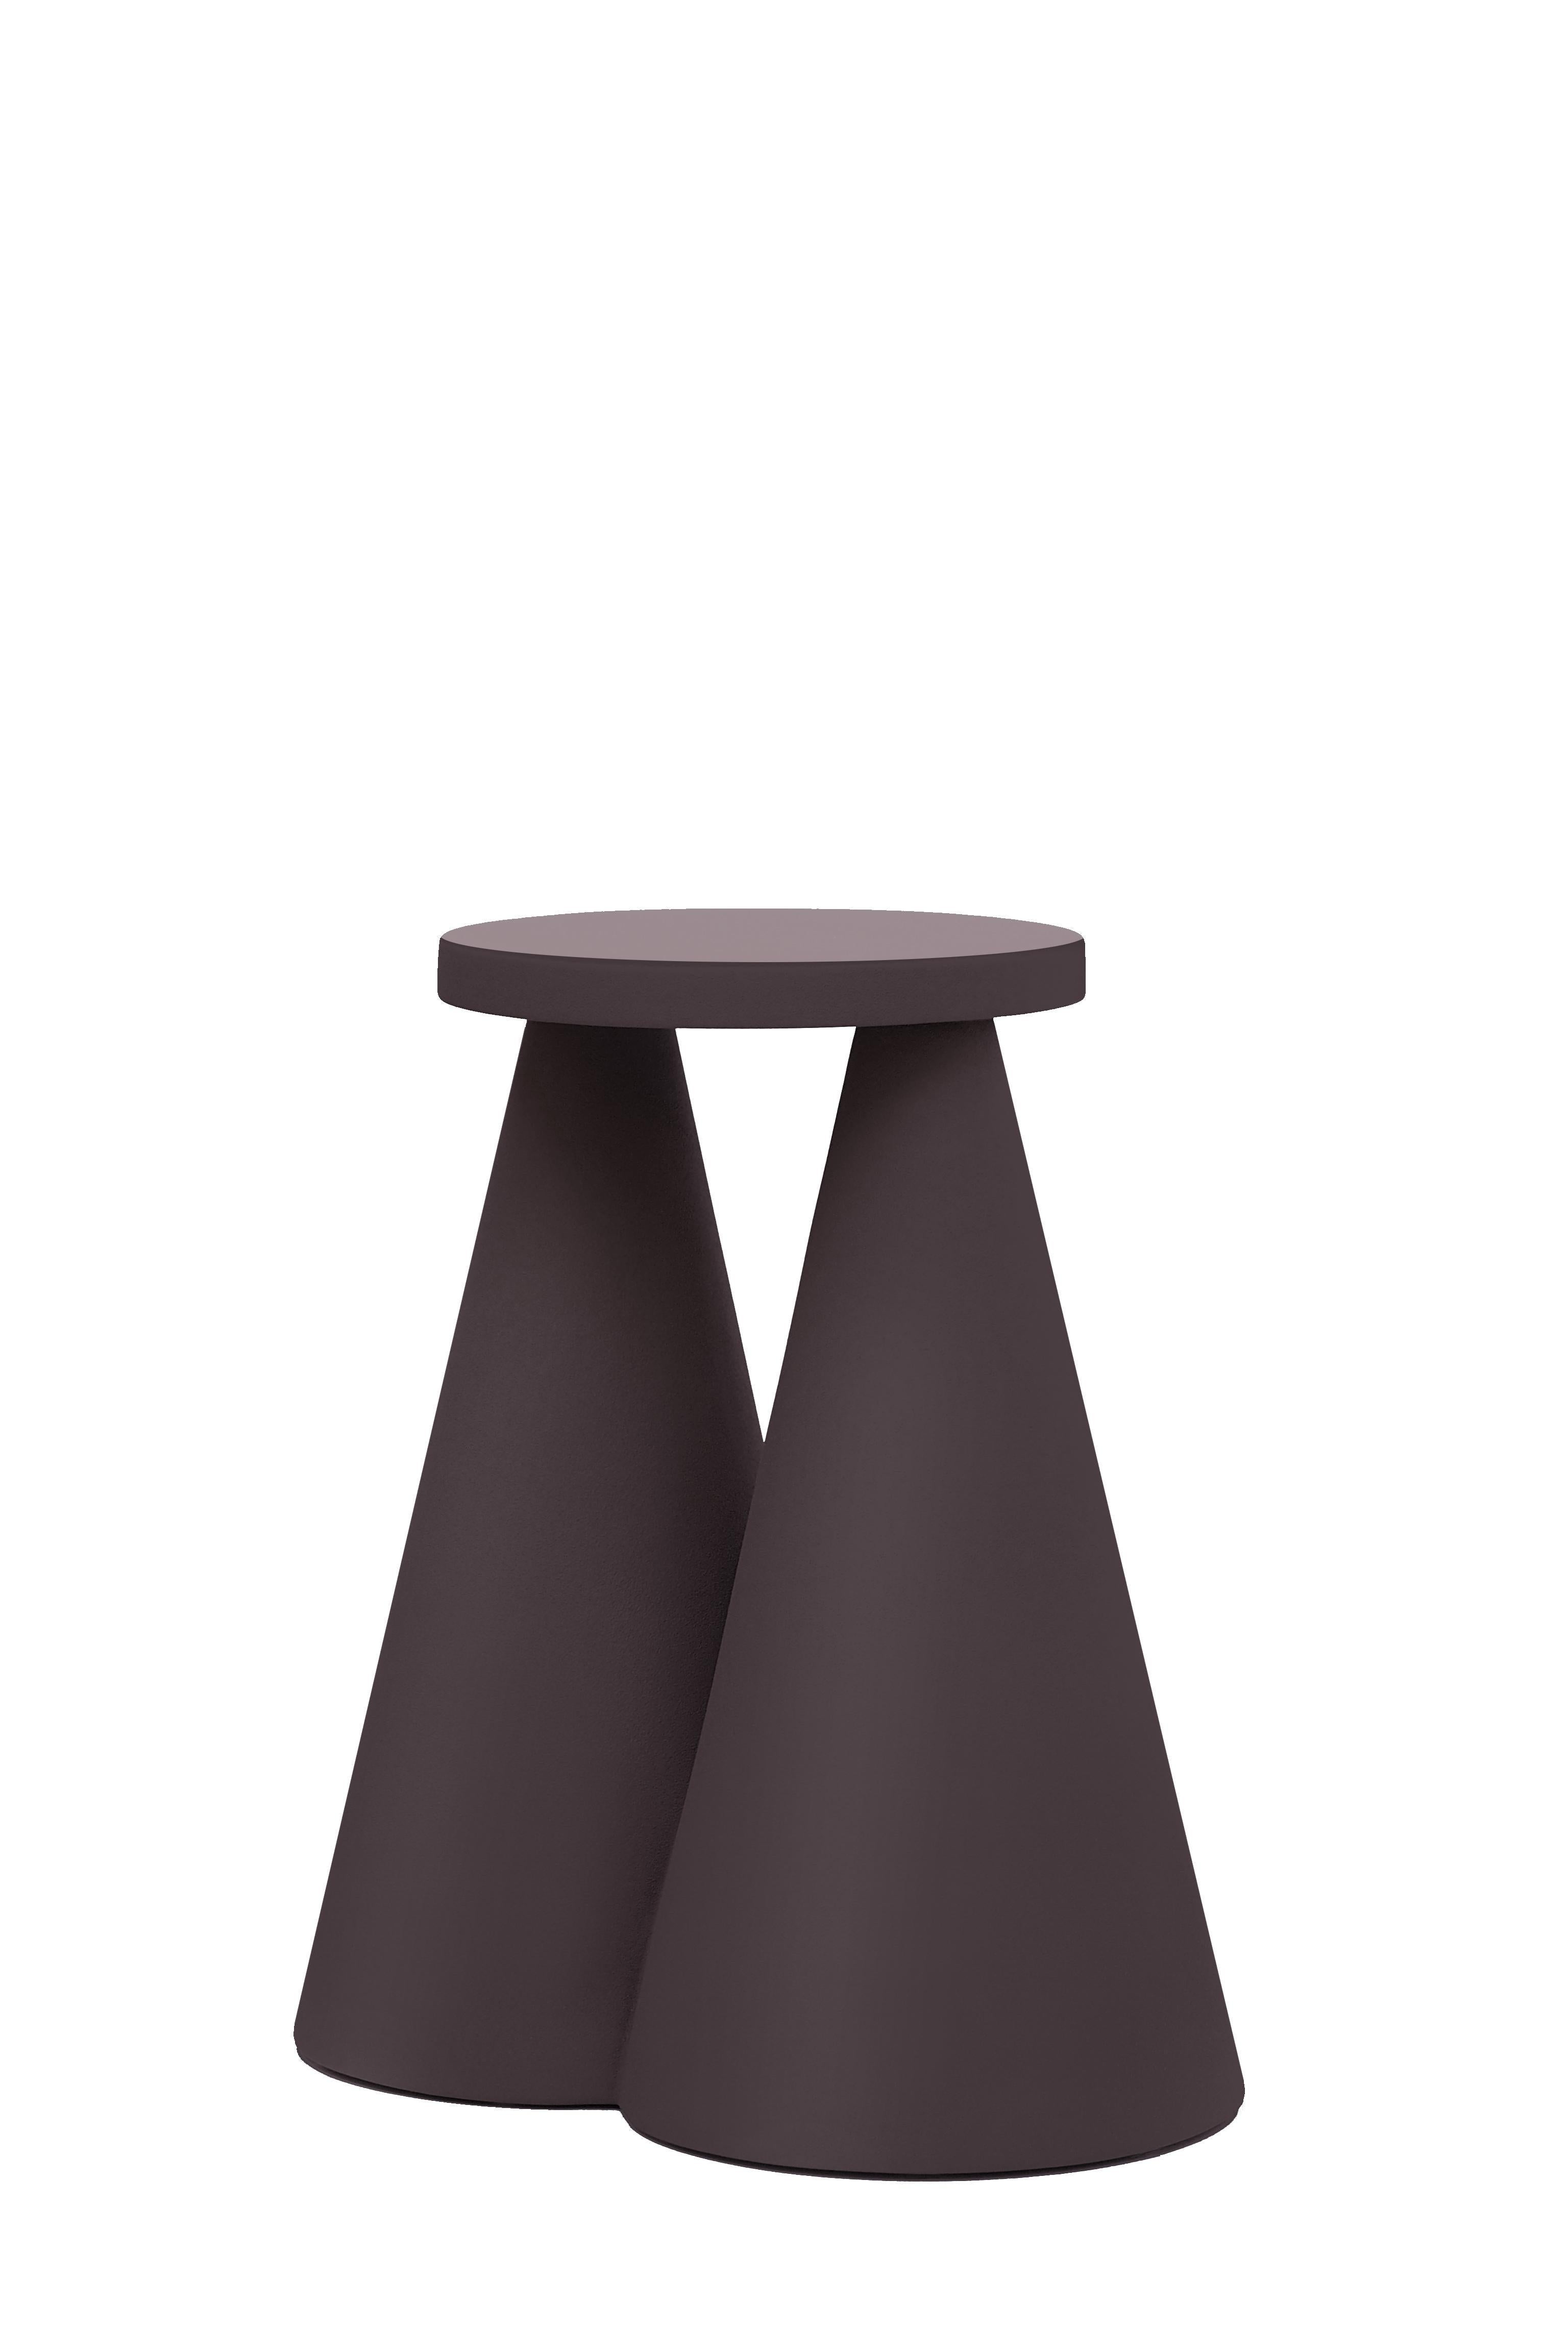 Ceramic Pair of Isola Side Table by Cara Davide